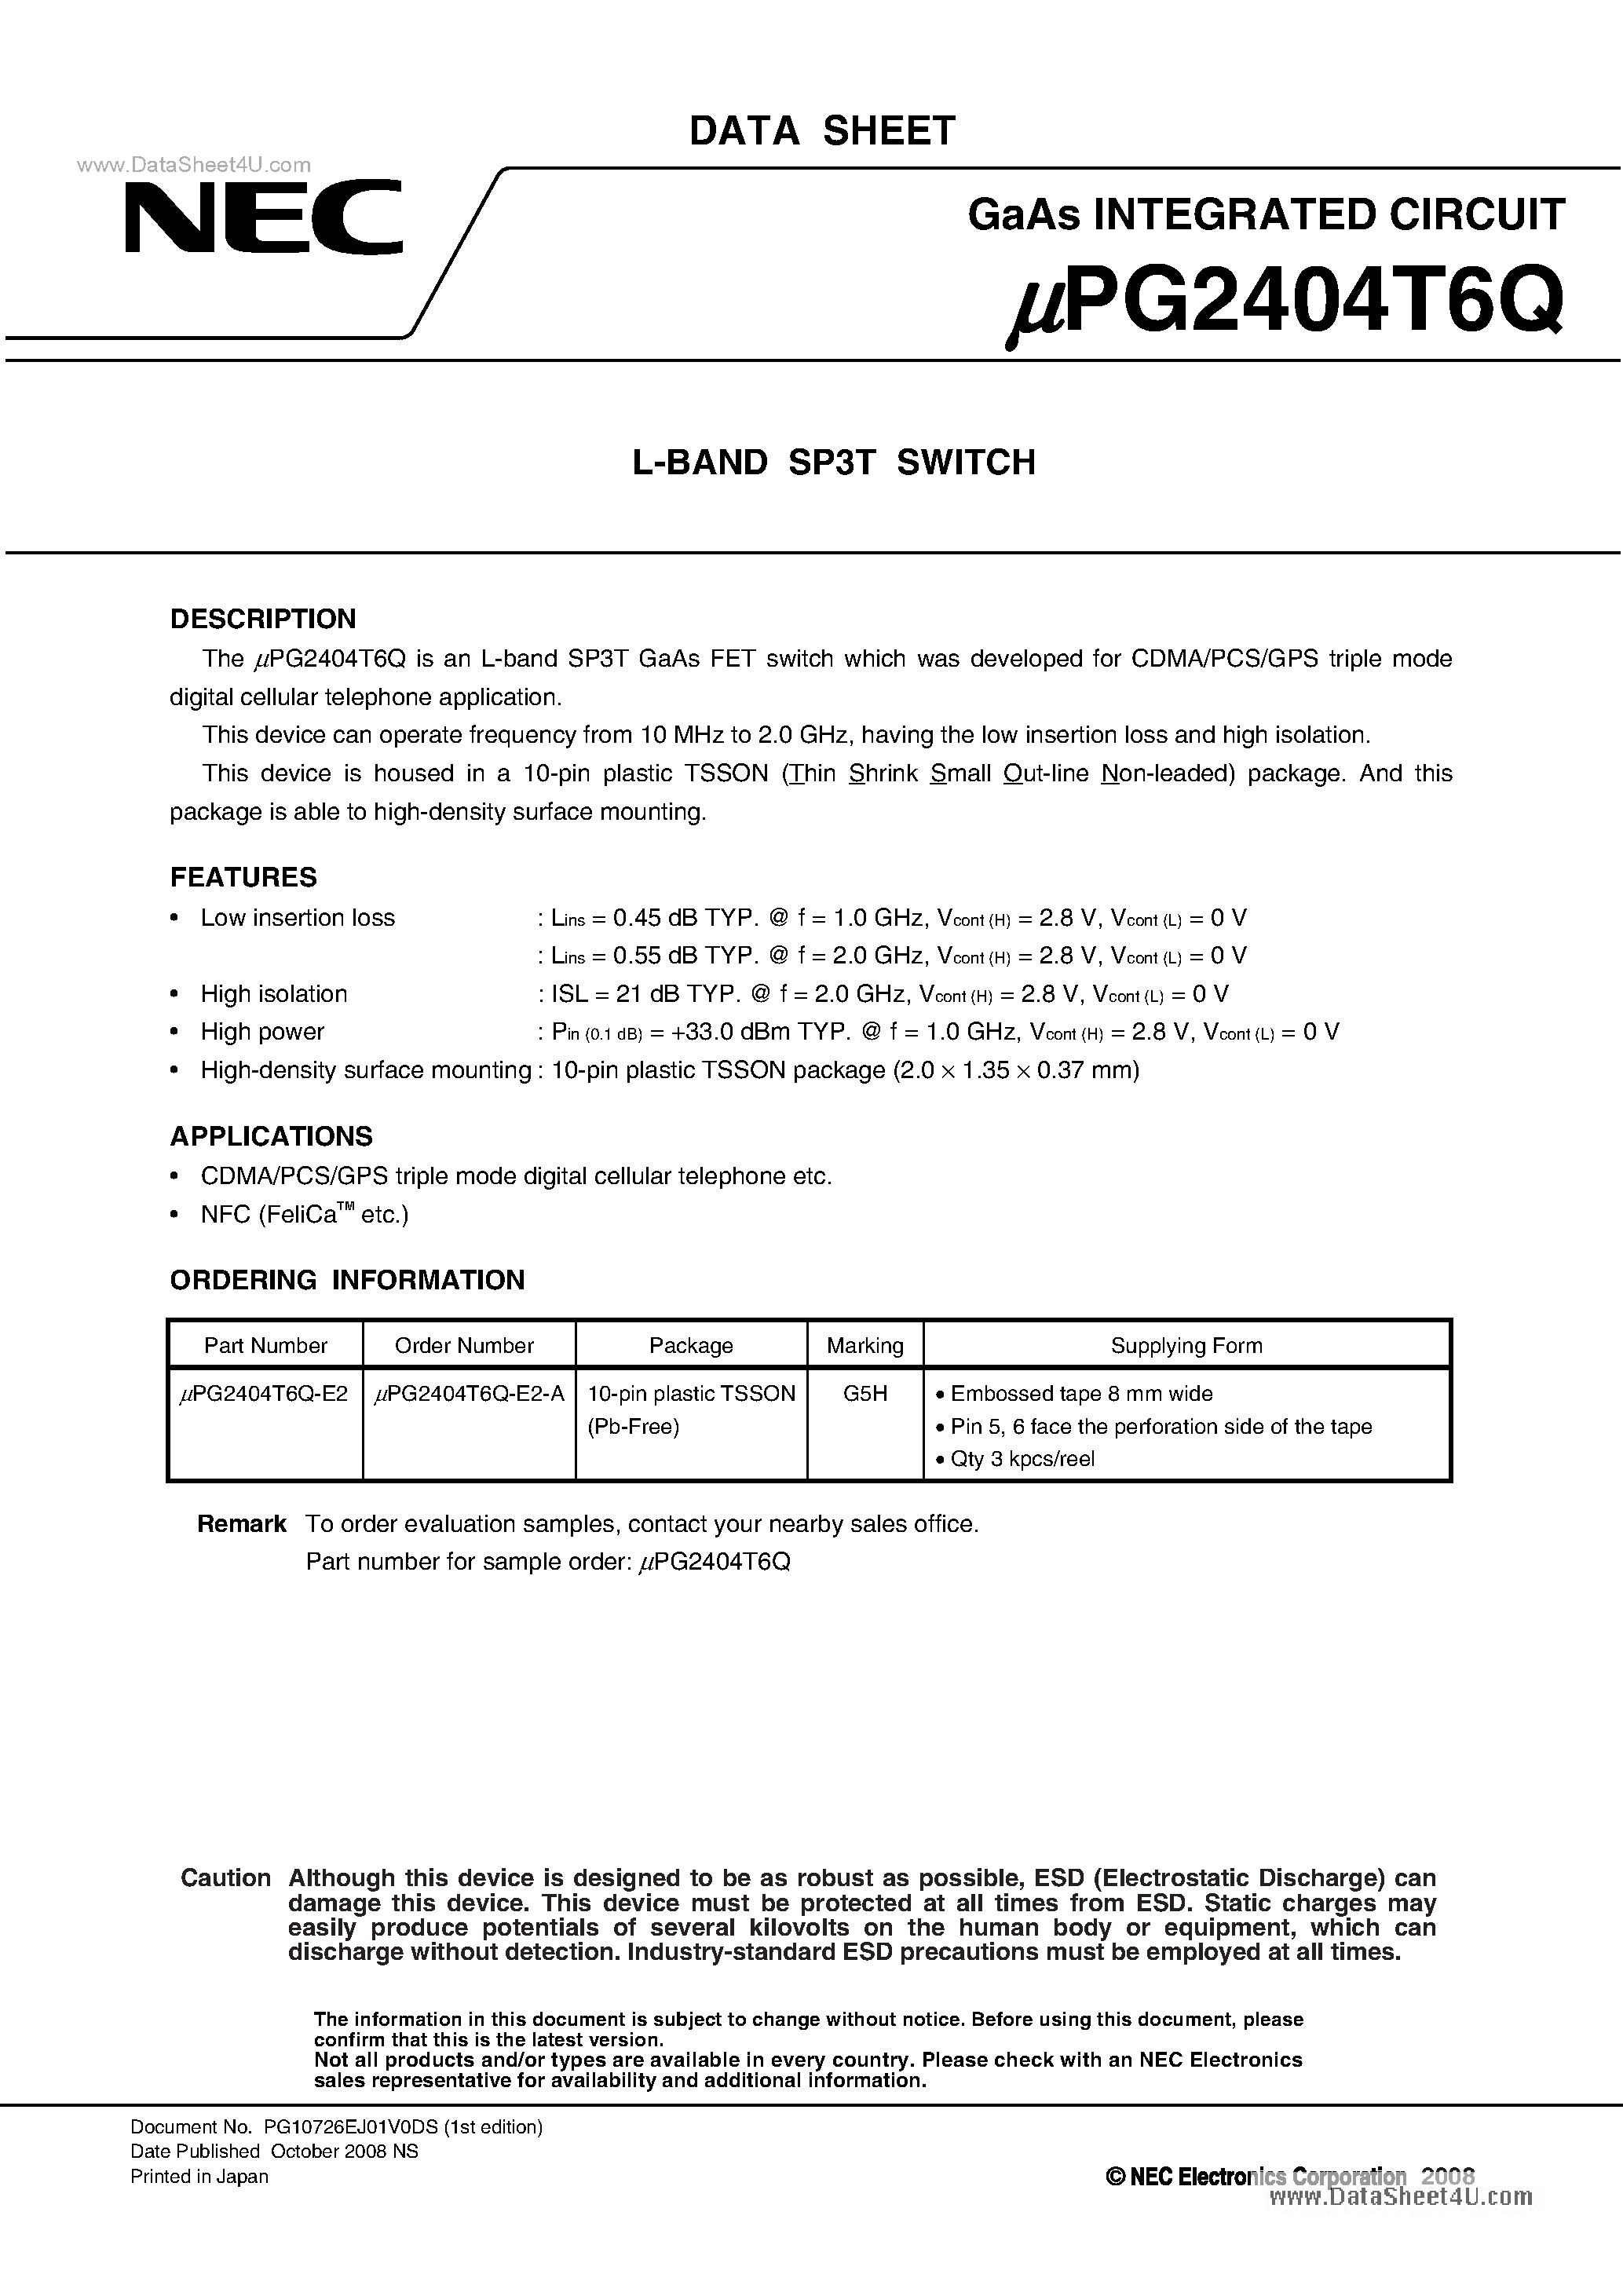 Datasheet UPG2404T6Q - L-BAND SP3T SWITCH page 1